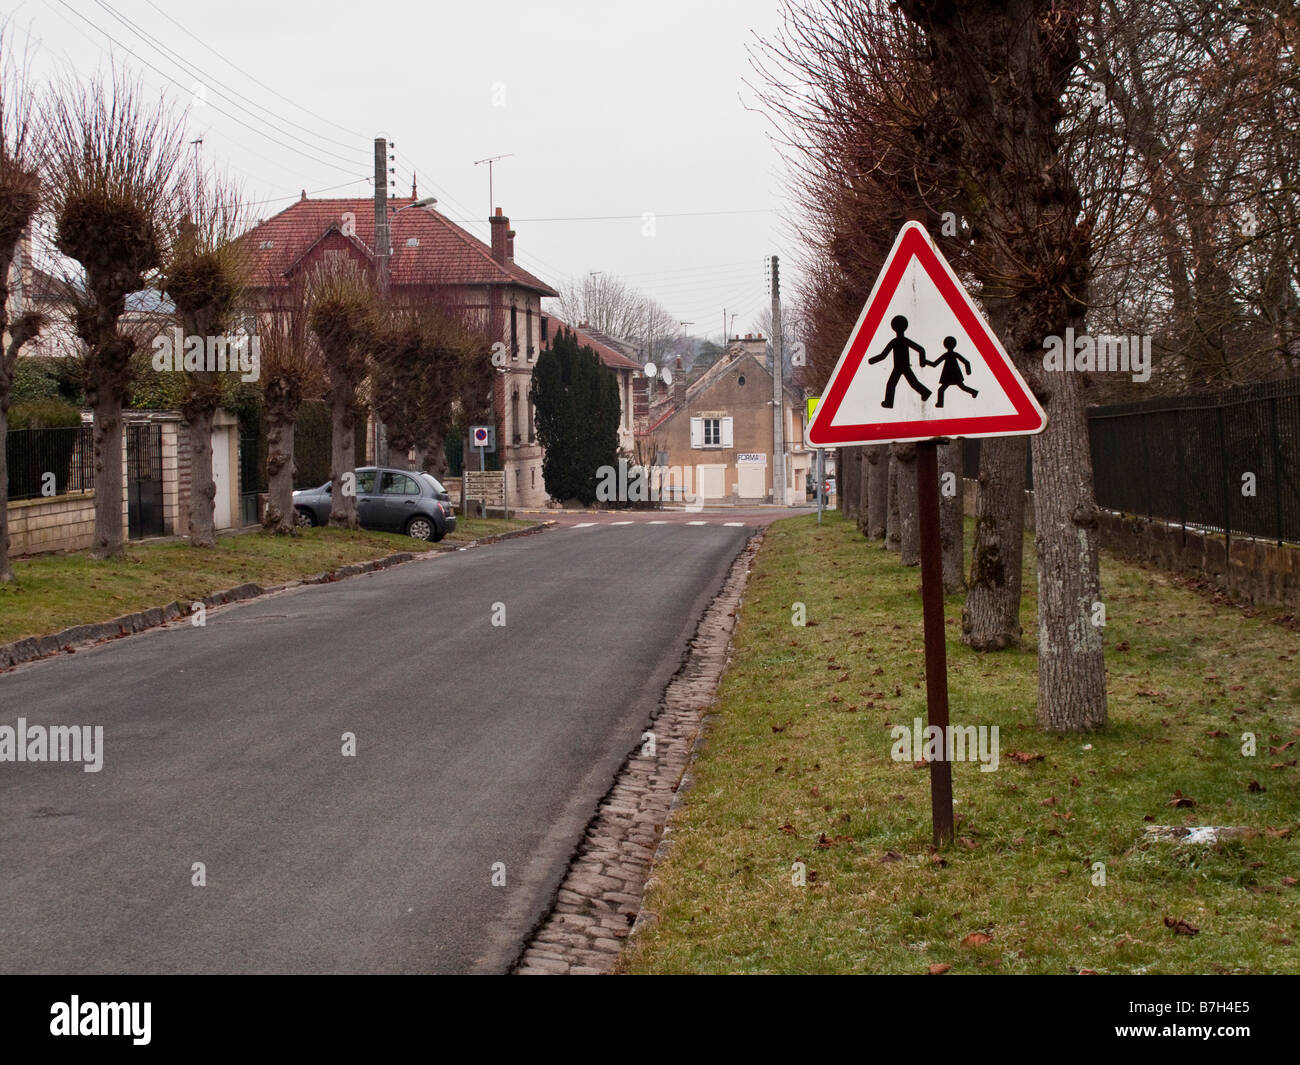 Children Crossing sign in the village of Precy sur Oise in France Jan 2009 Stock Photo